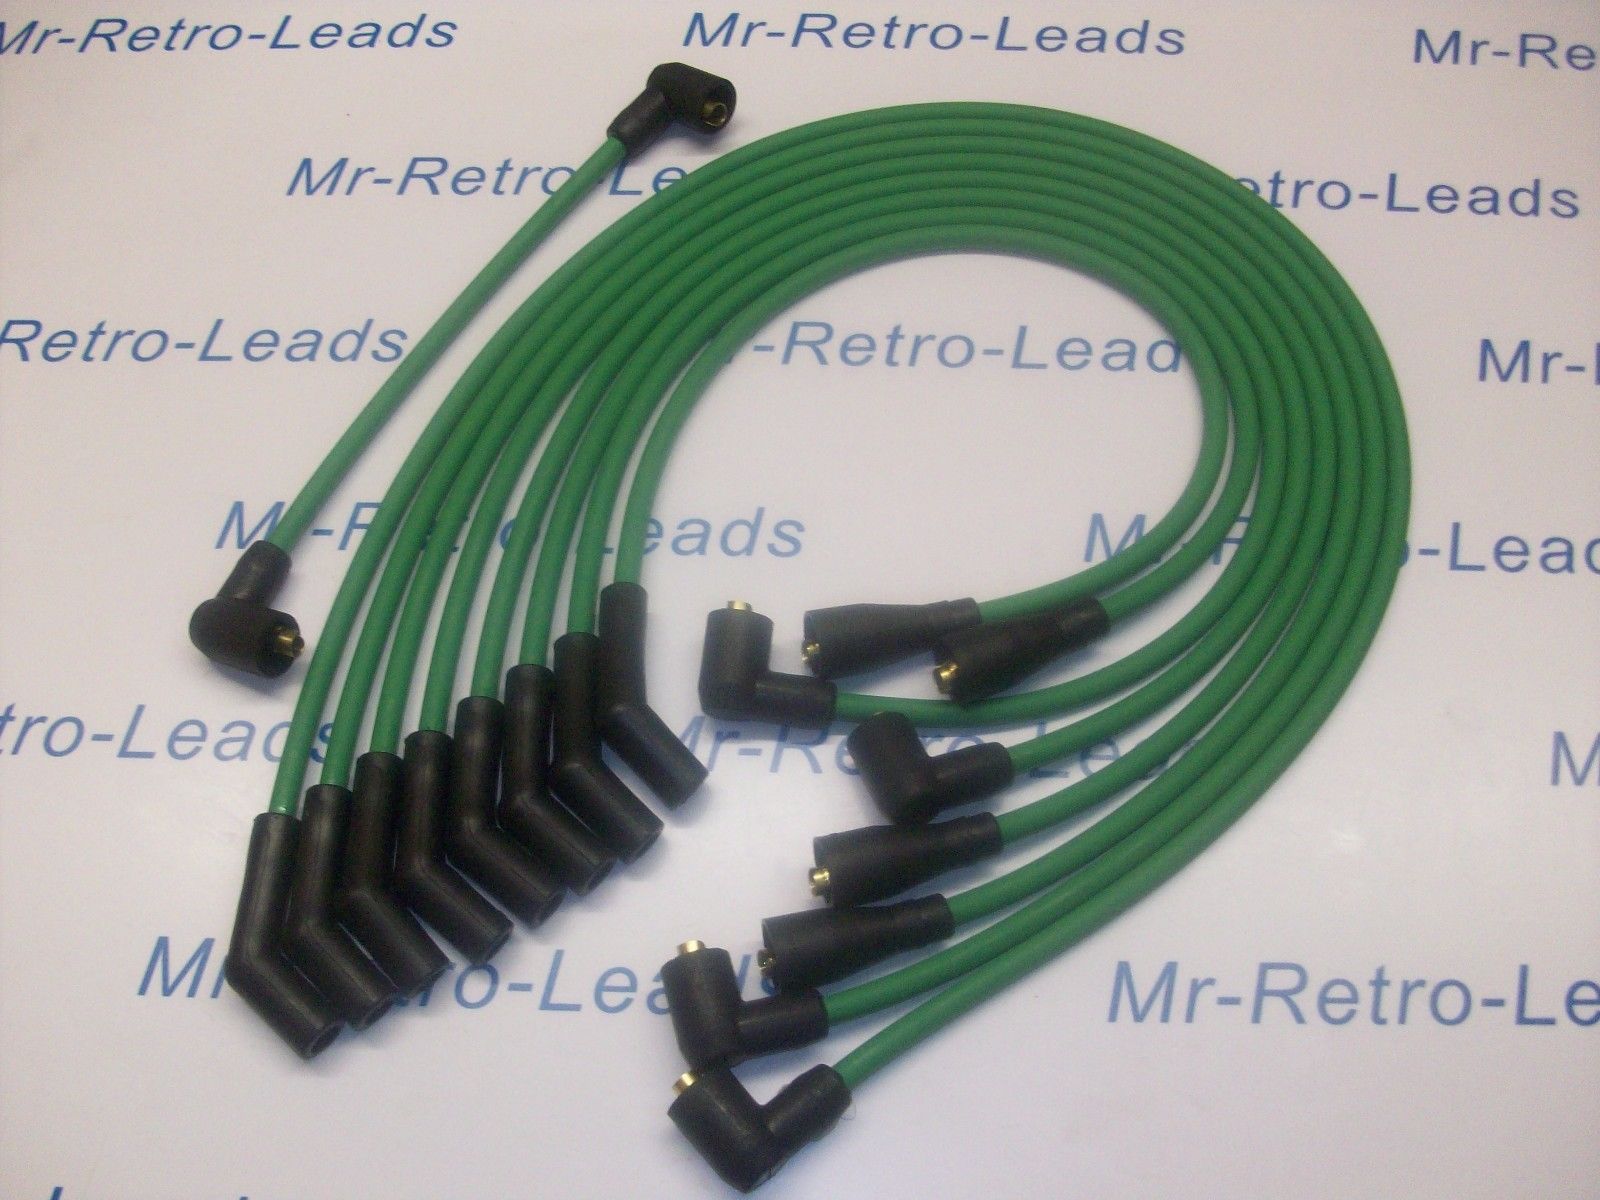 Green 8mm Performance Ignition Leads For Triumph Stag Rover 3.0 V8 Quality Leads